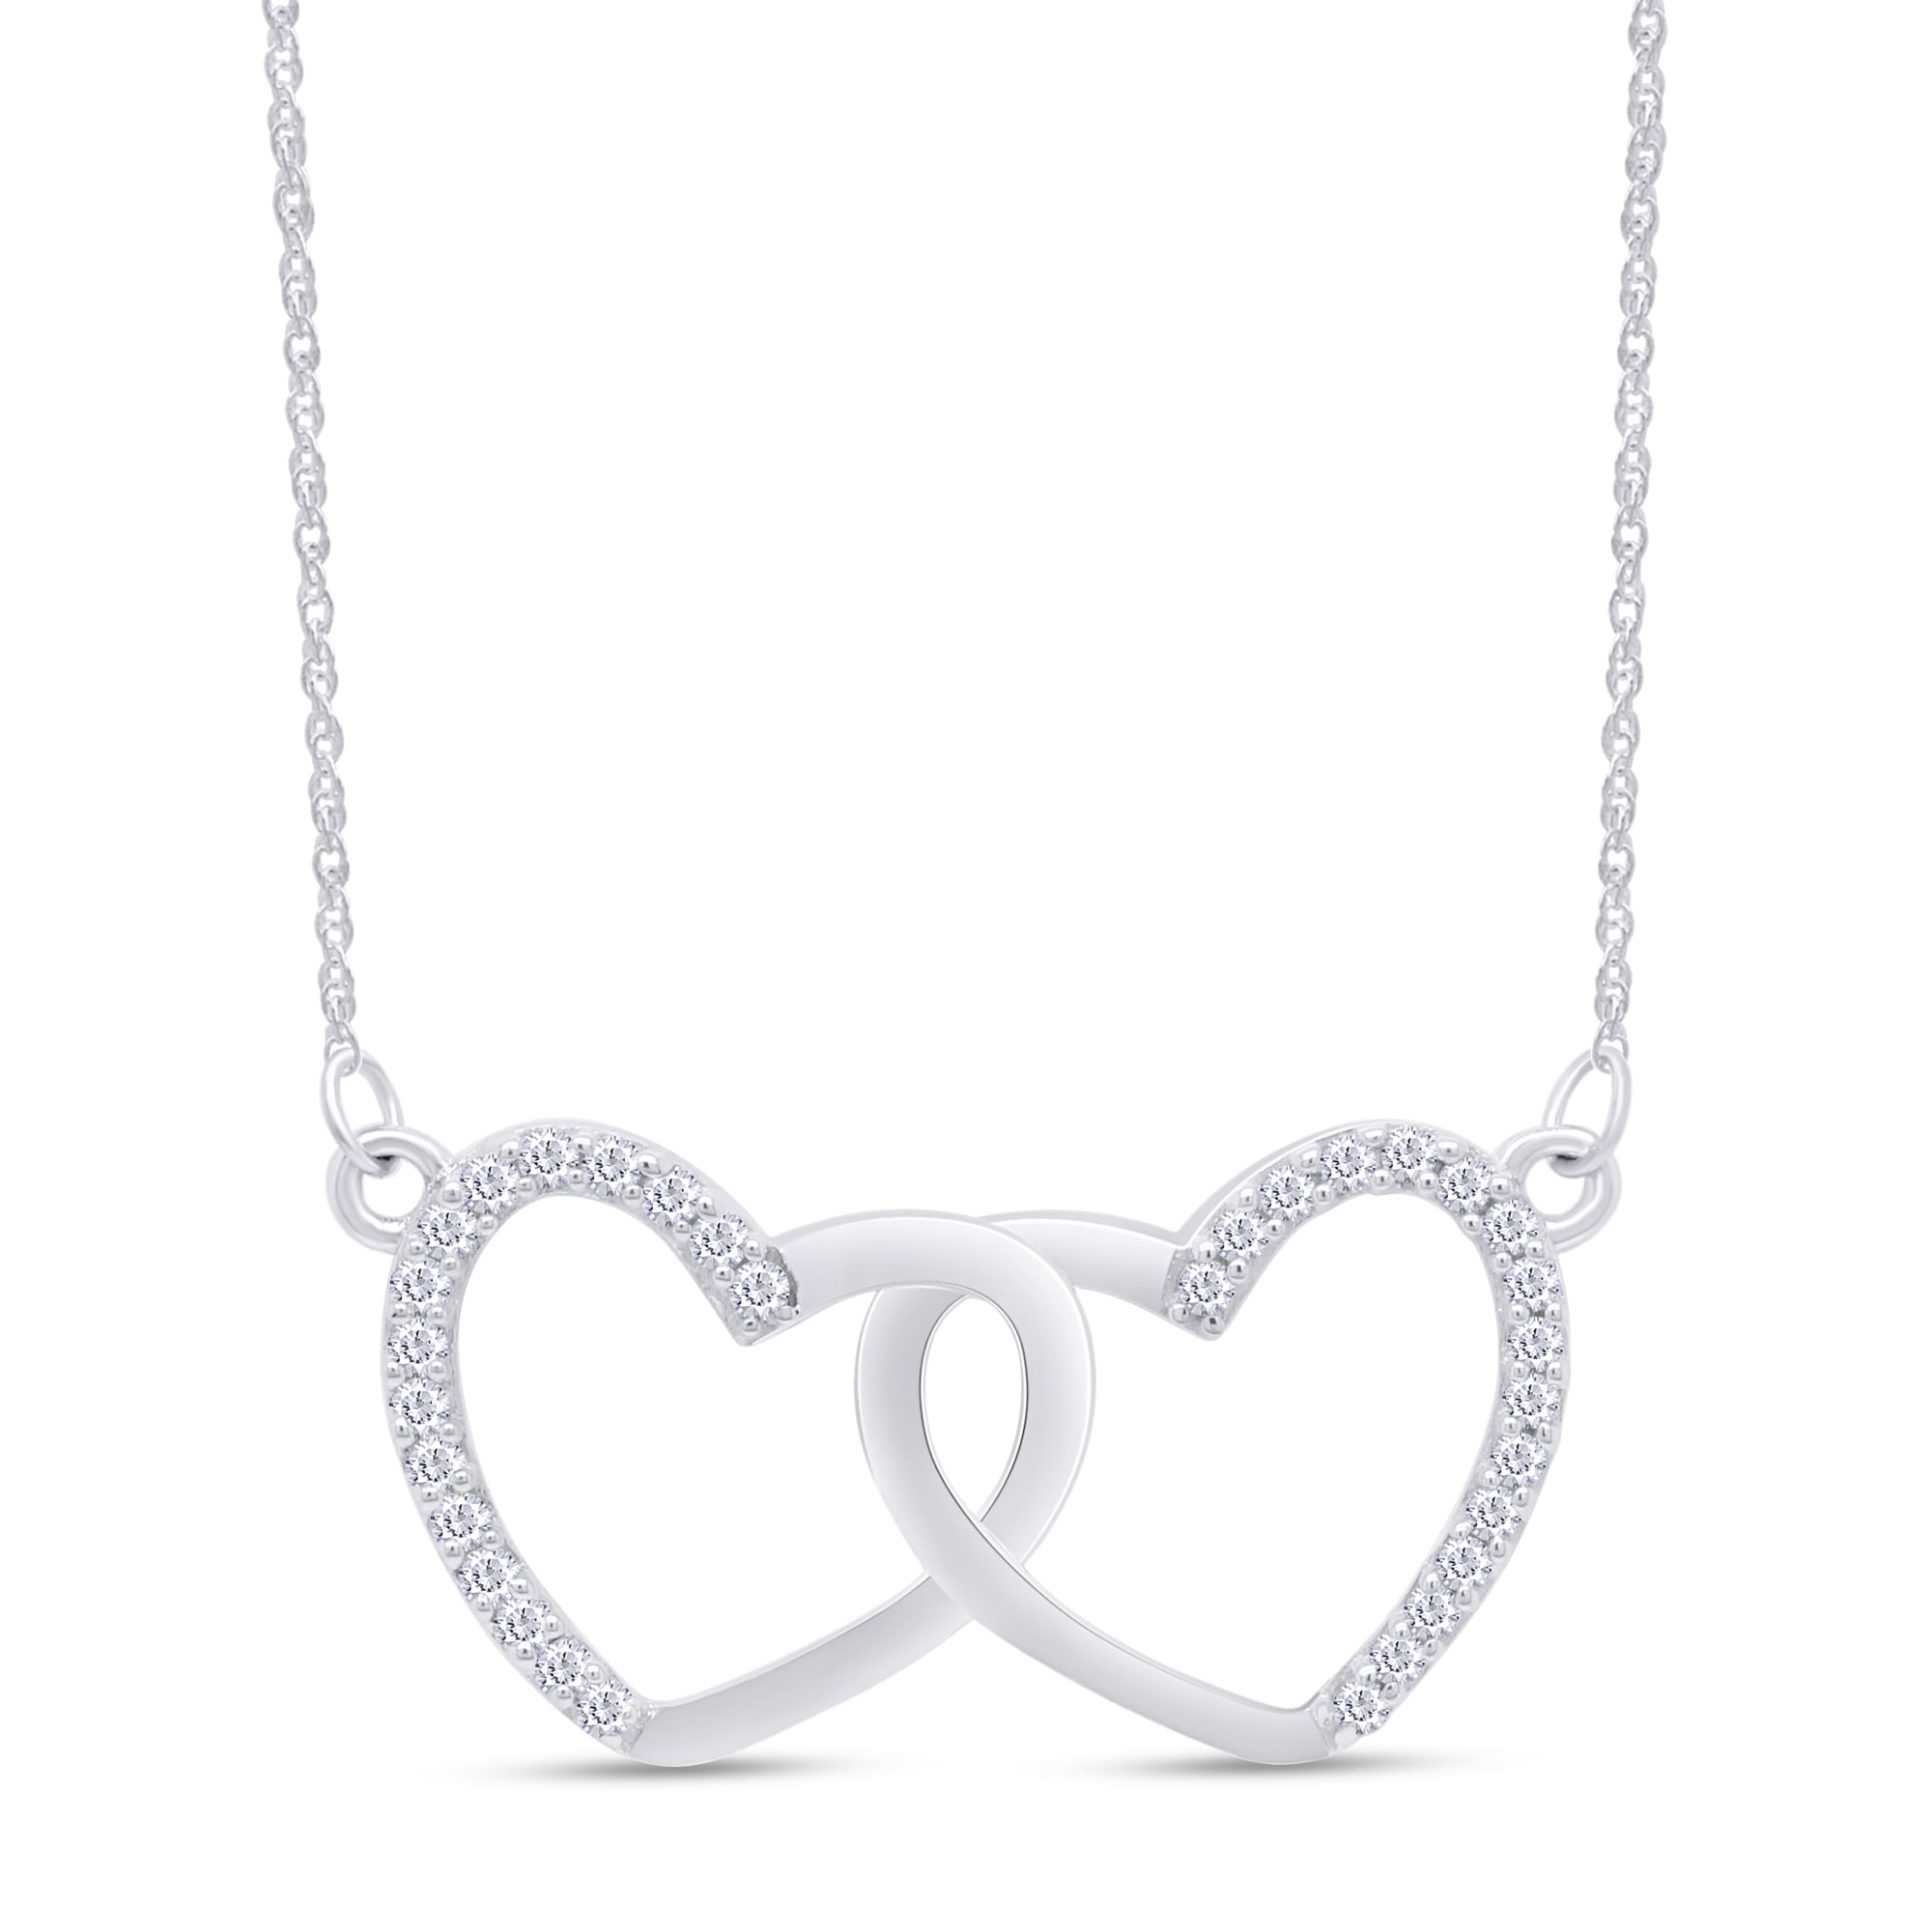 Wishrocks 14K White Gold Over Sterling Silver Italian Crafted 3MM 18 Inches Heart Link Chain